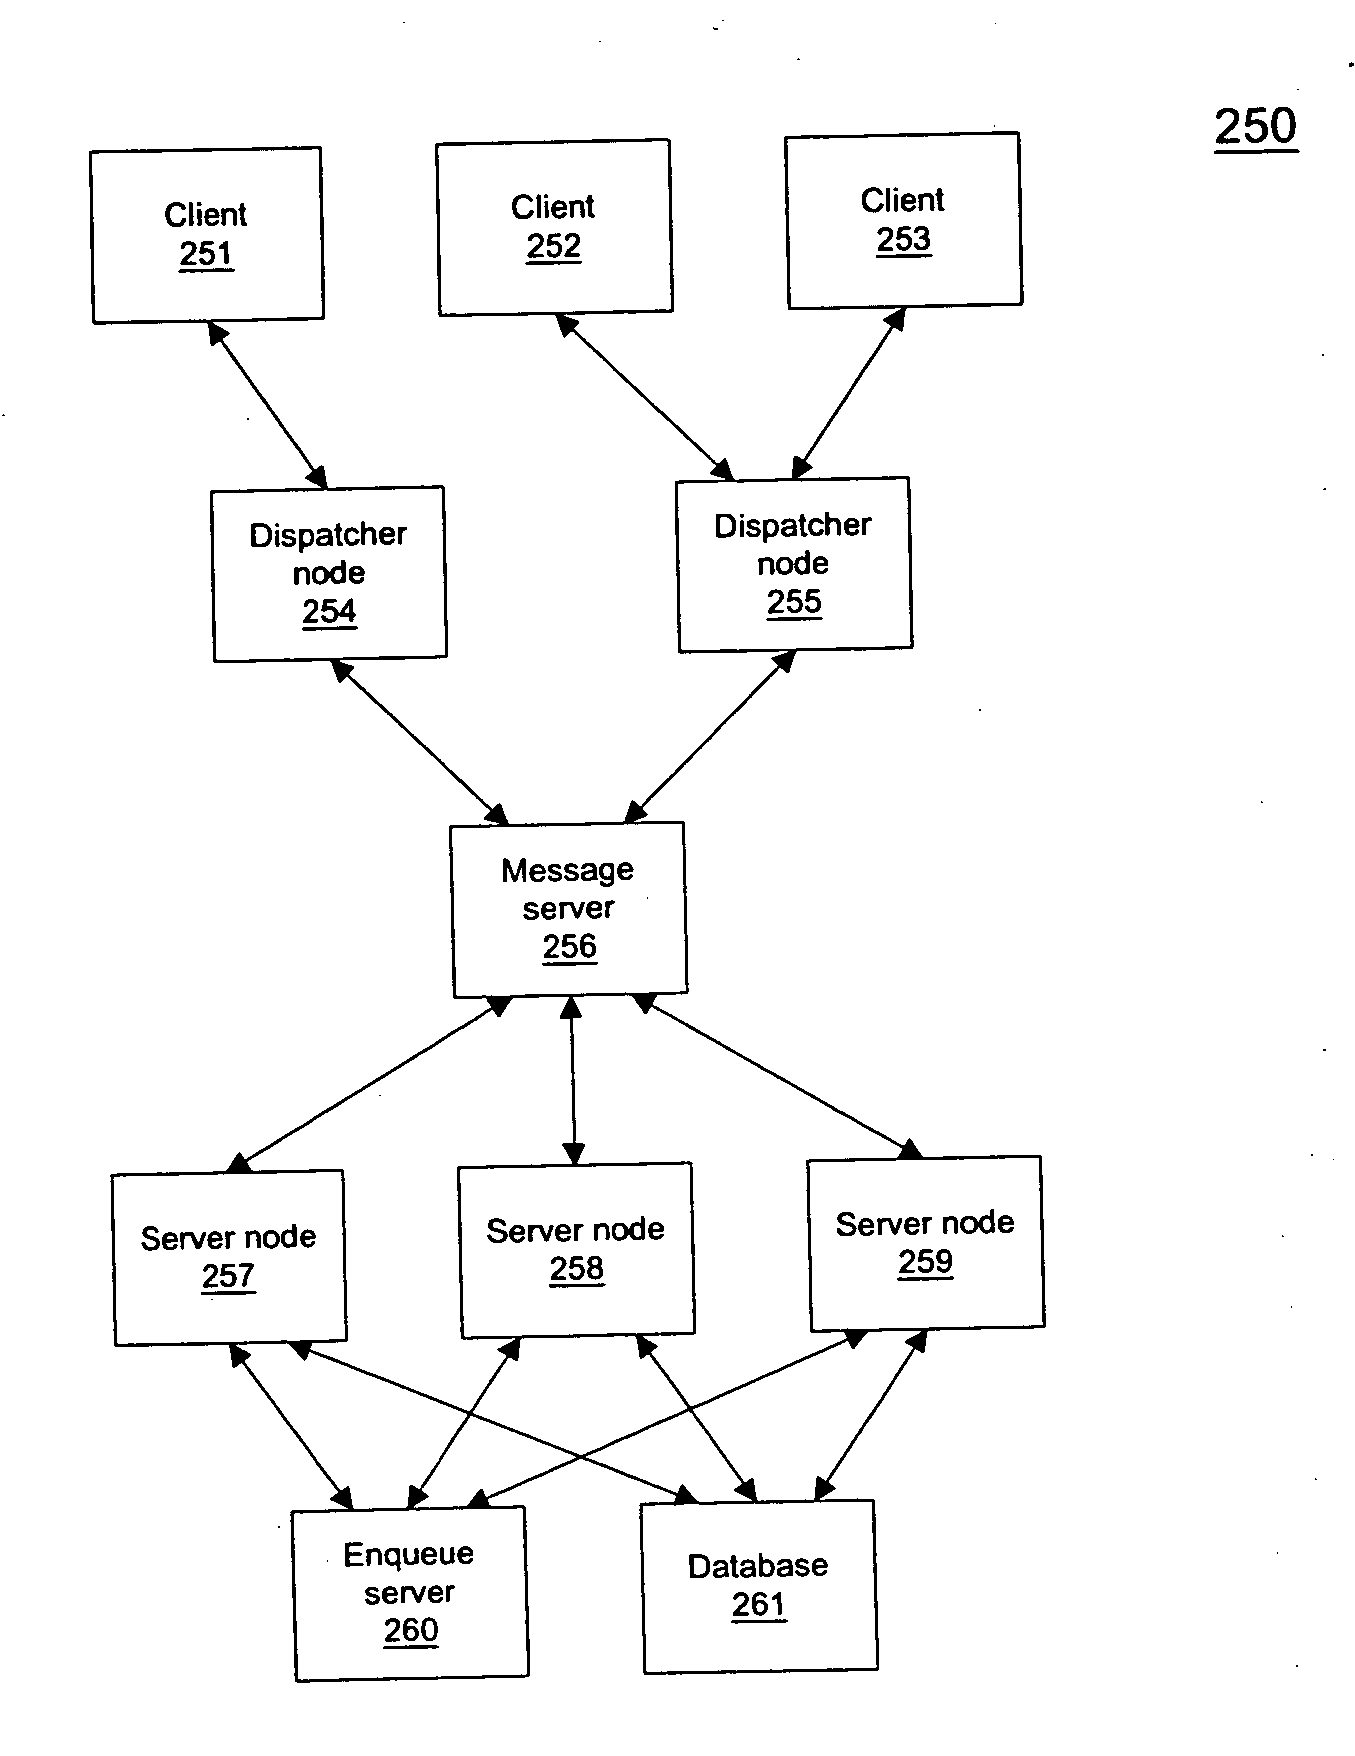 Delivering messages in an enterprise messaging system using message selector hierarchy